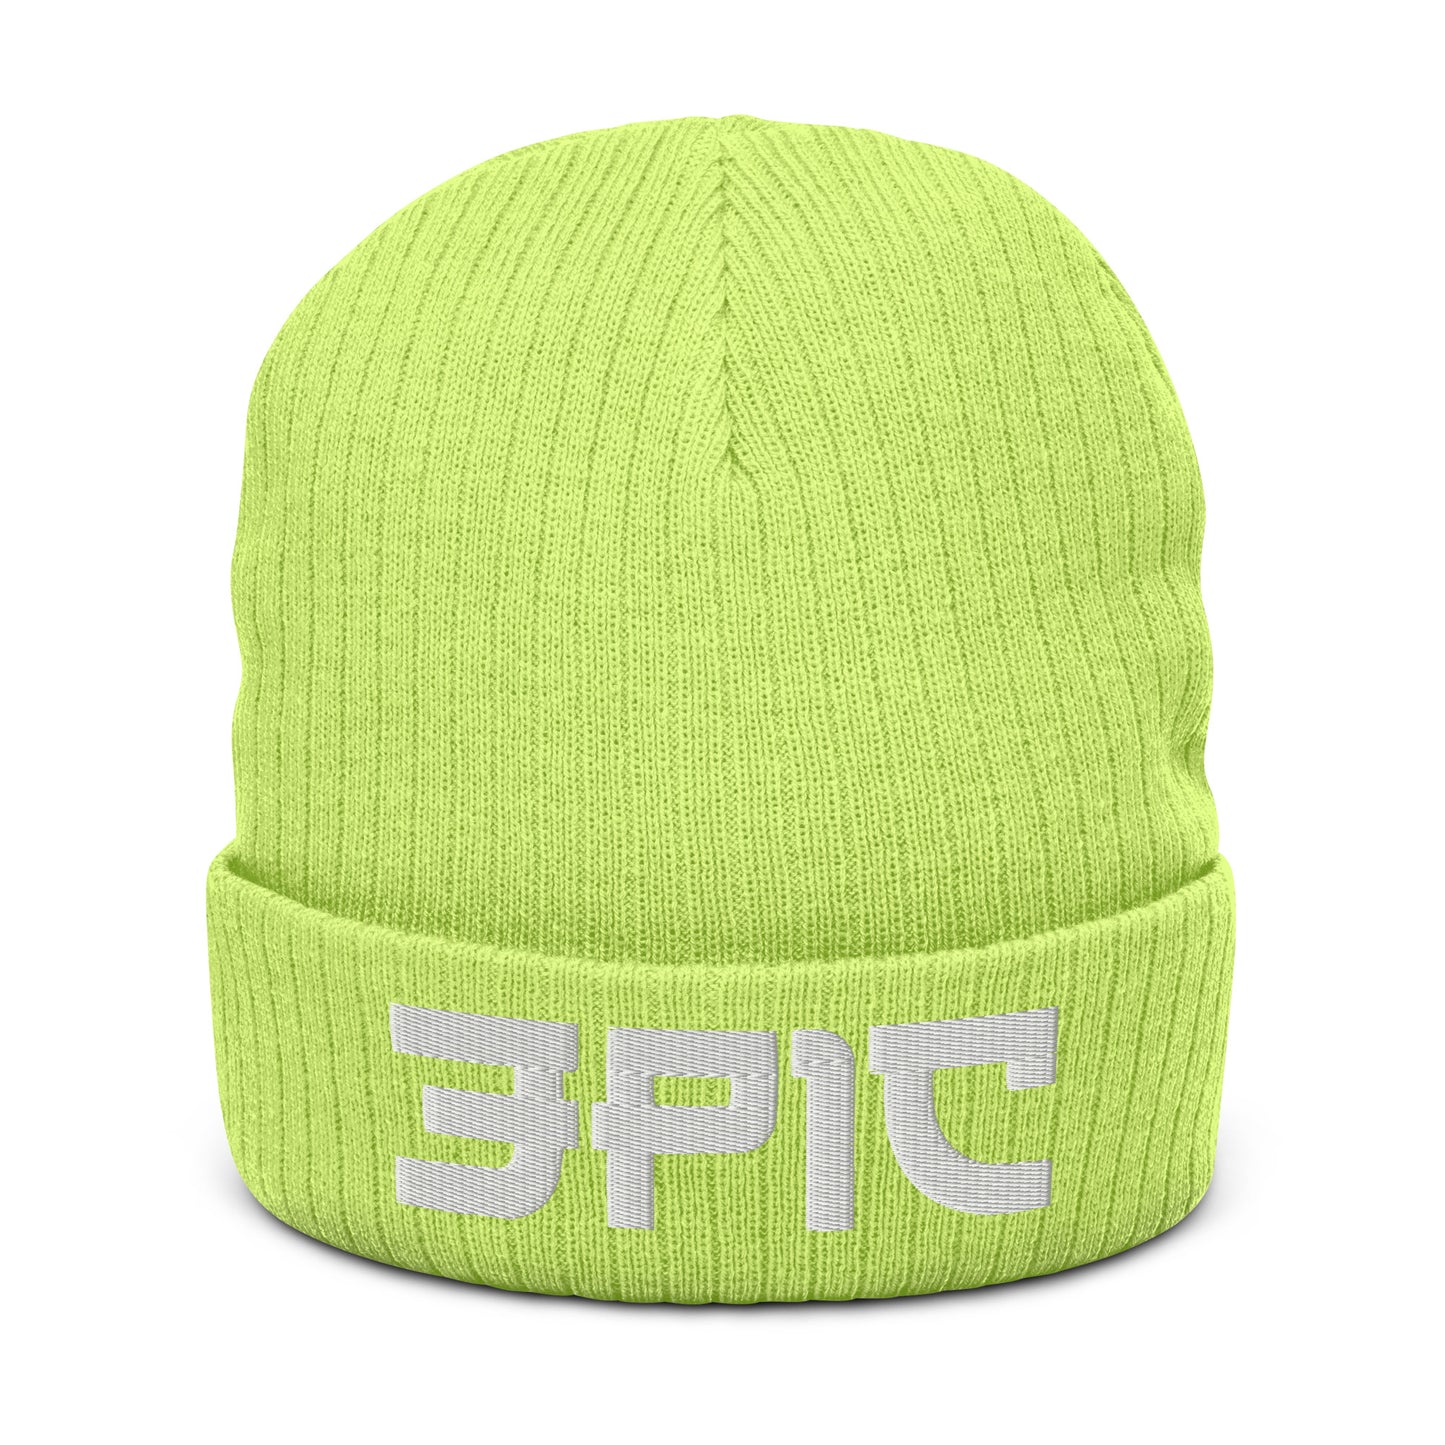 3P1C Ribbed Knit Touque